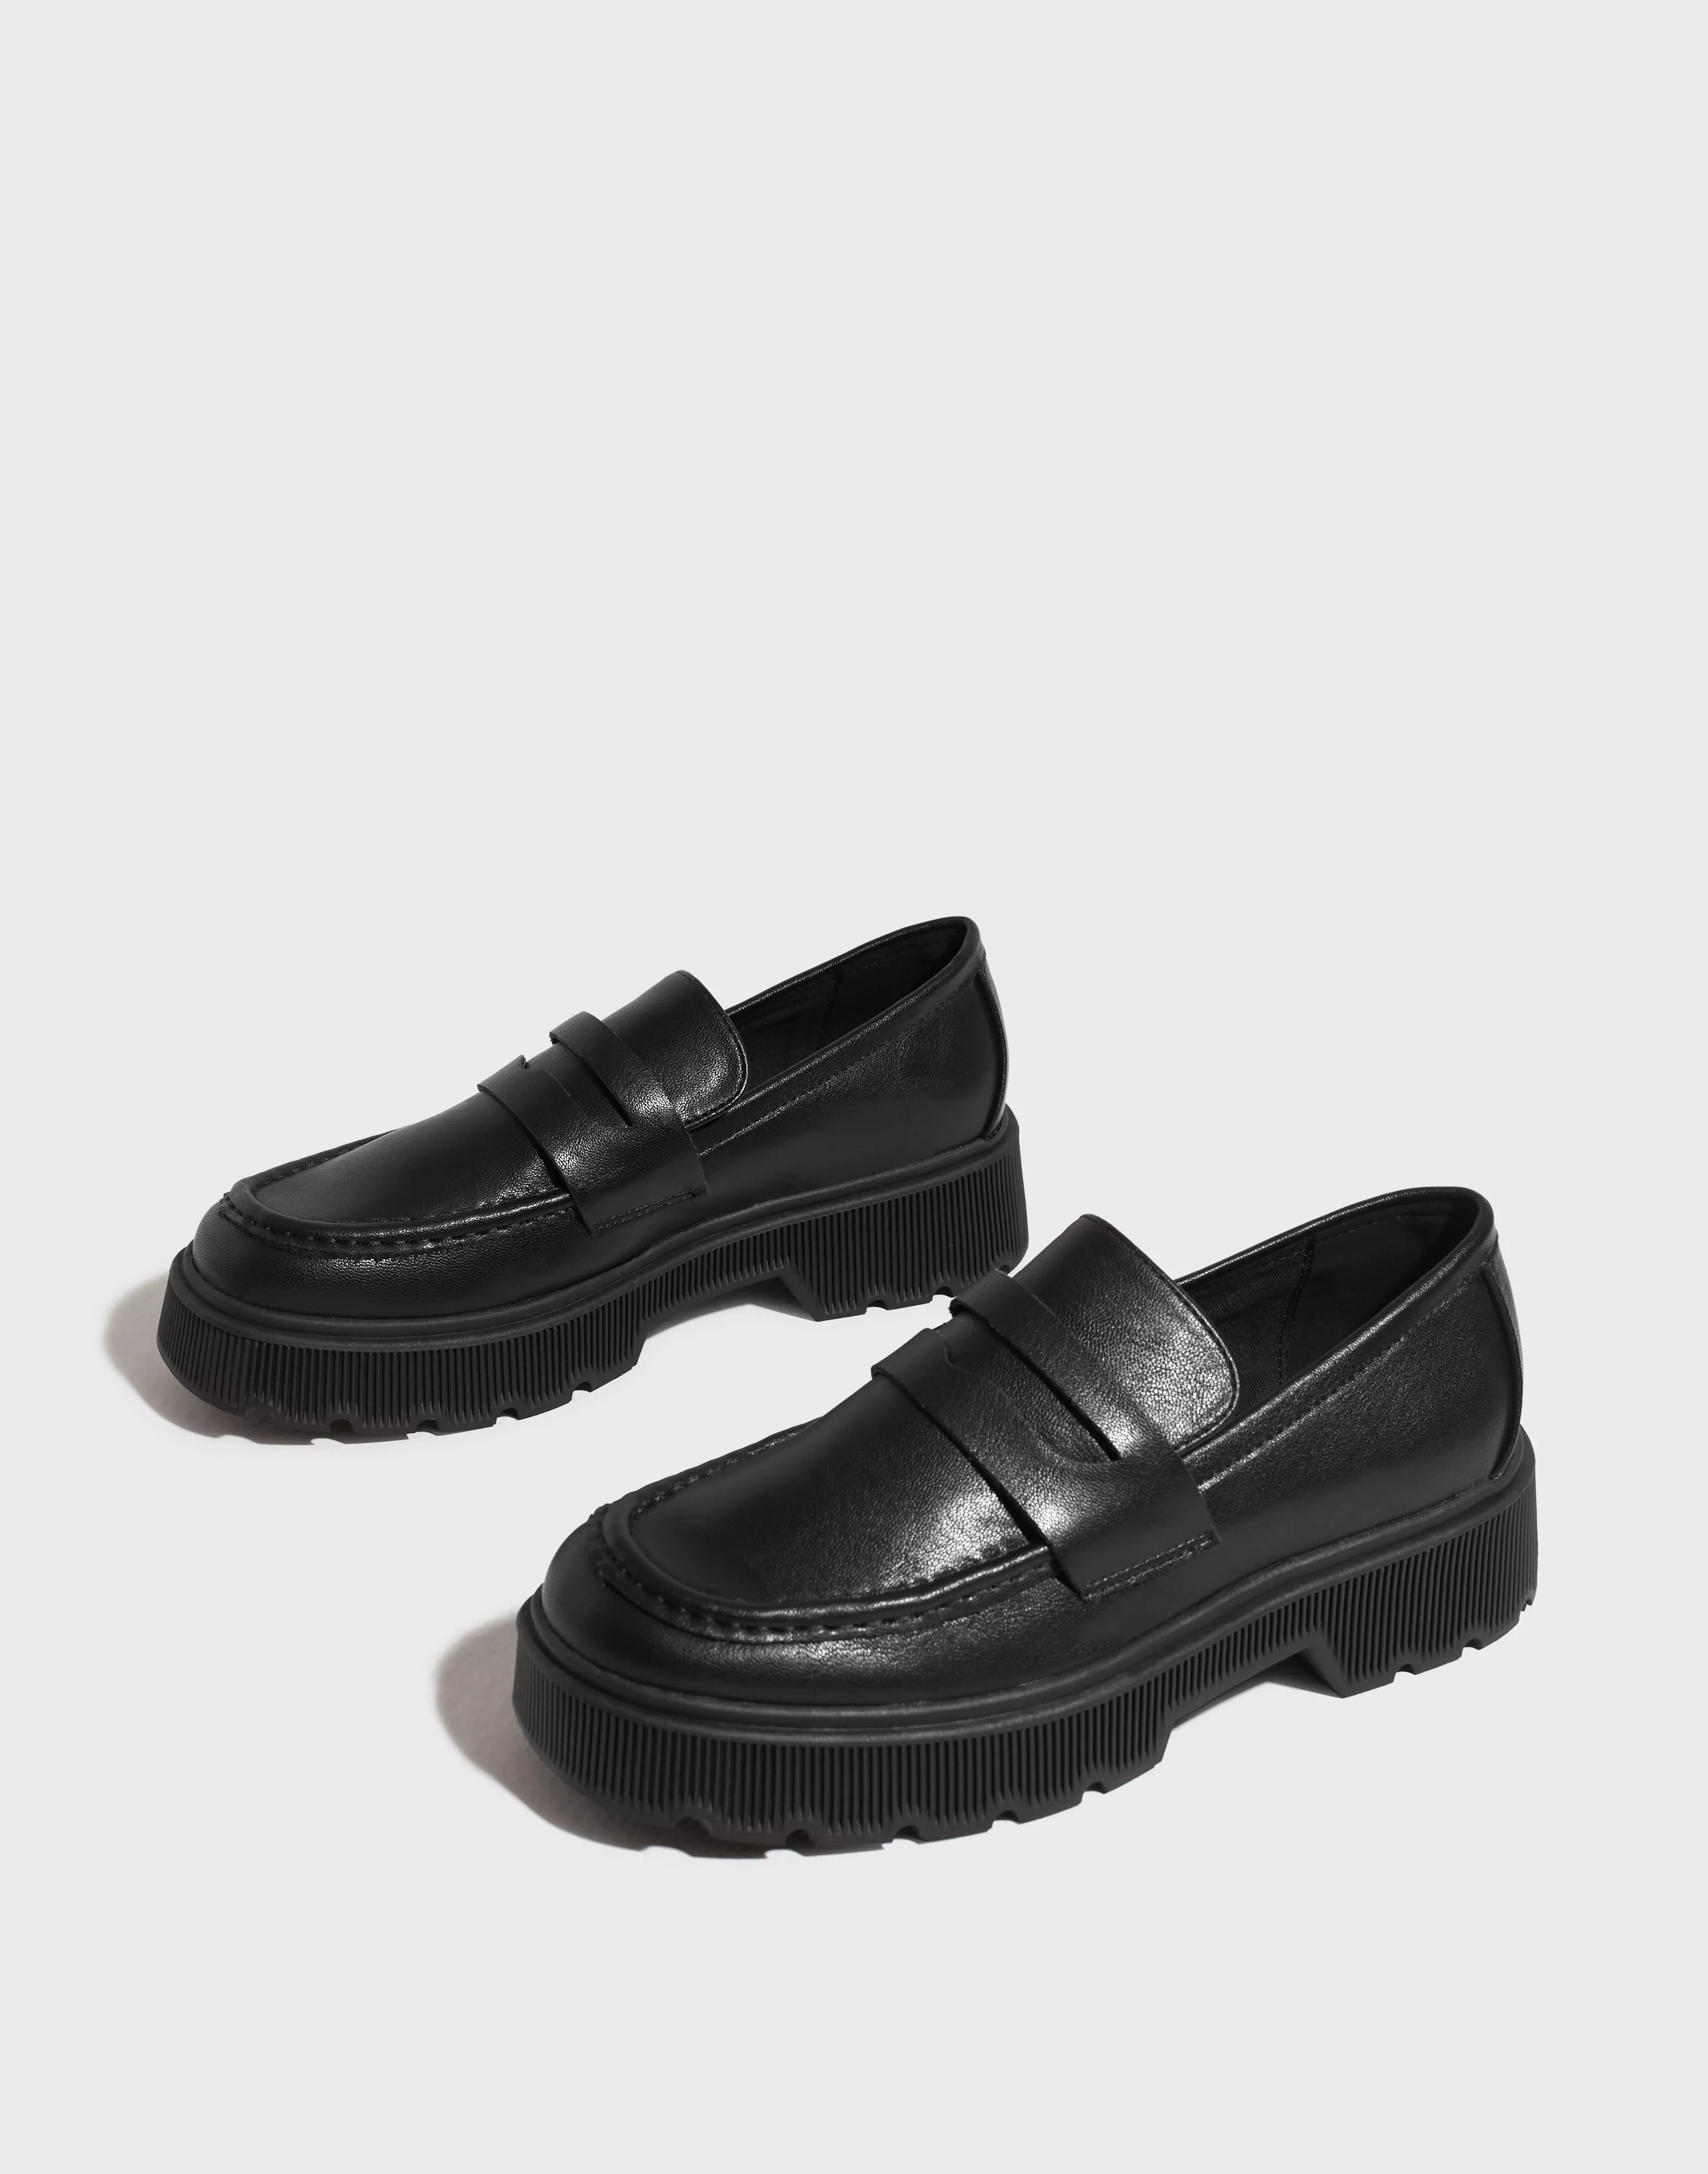 Buy Duffy Loafer - Black Nelly.com